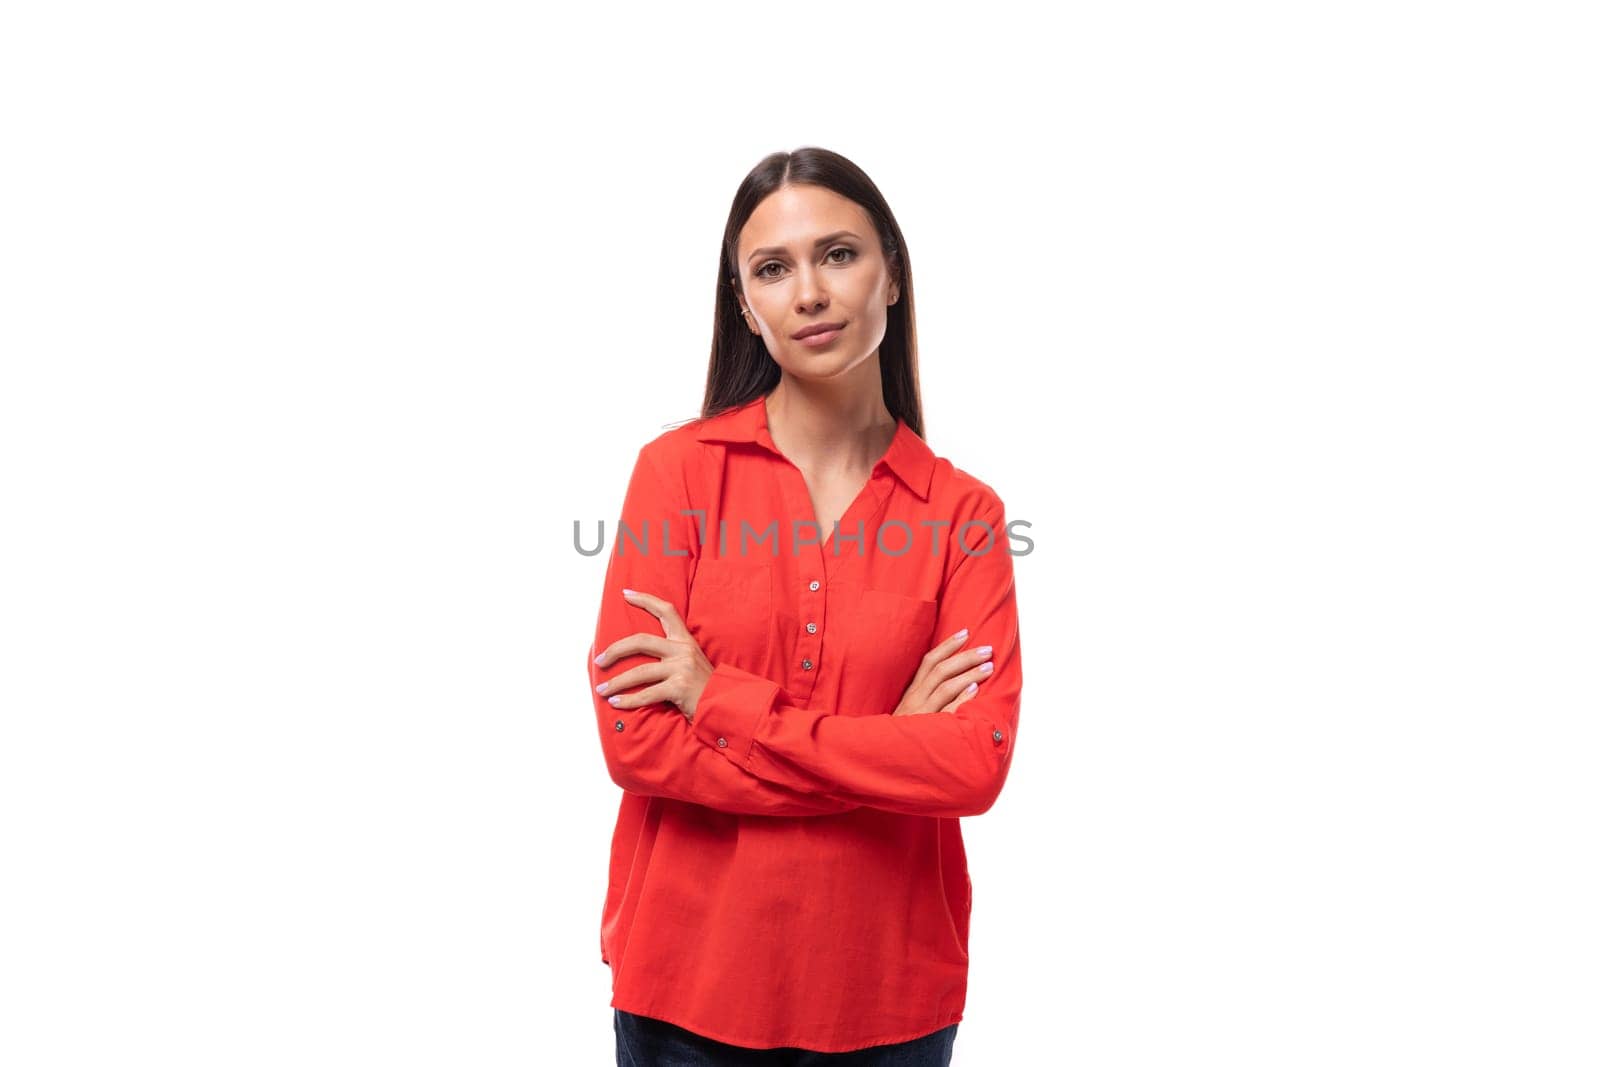 pretty young business woman with black hair dressed in a red shirt on a white background with copy space by TRMK